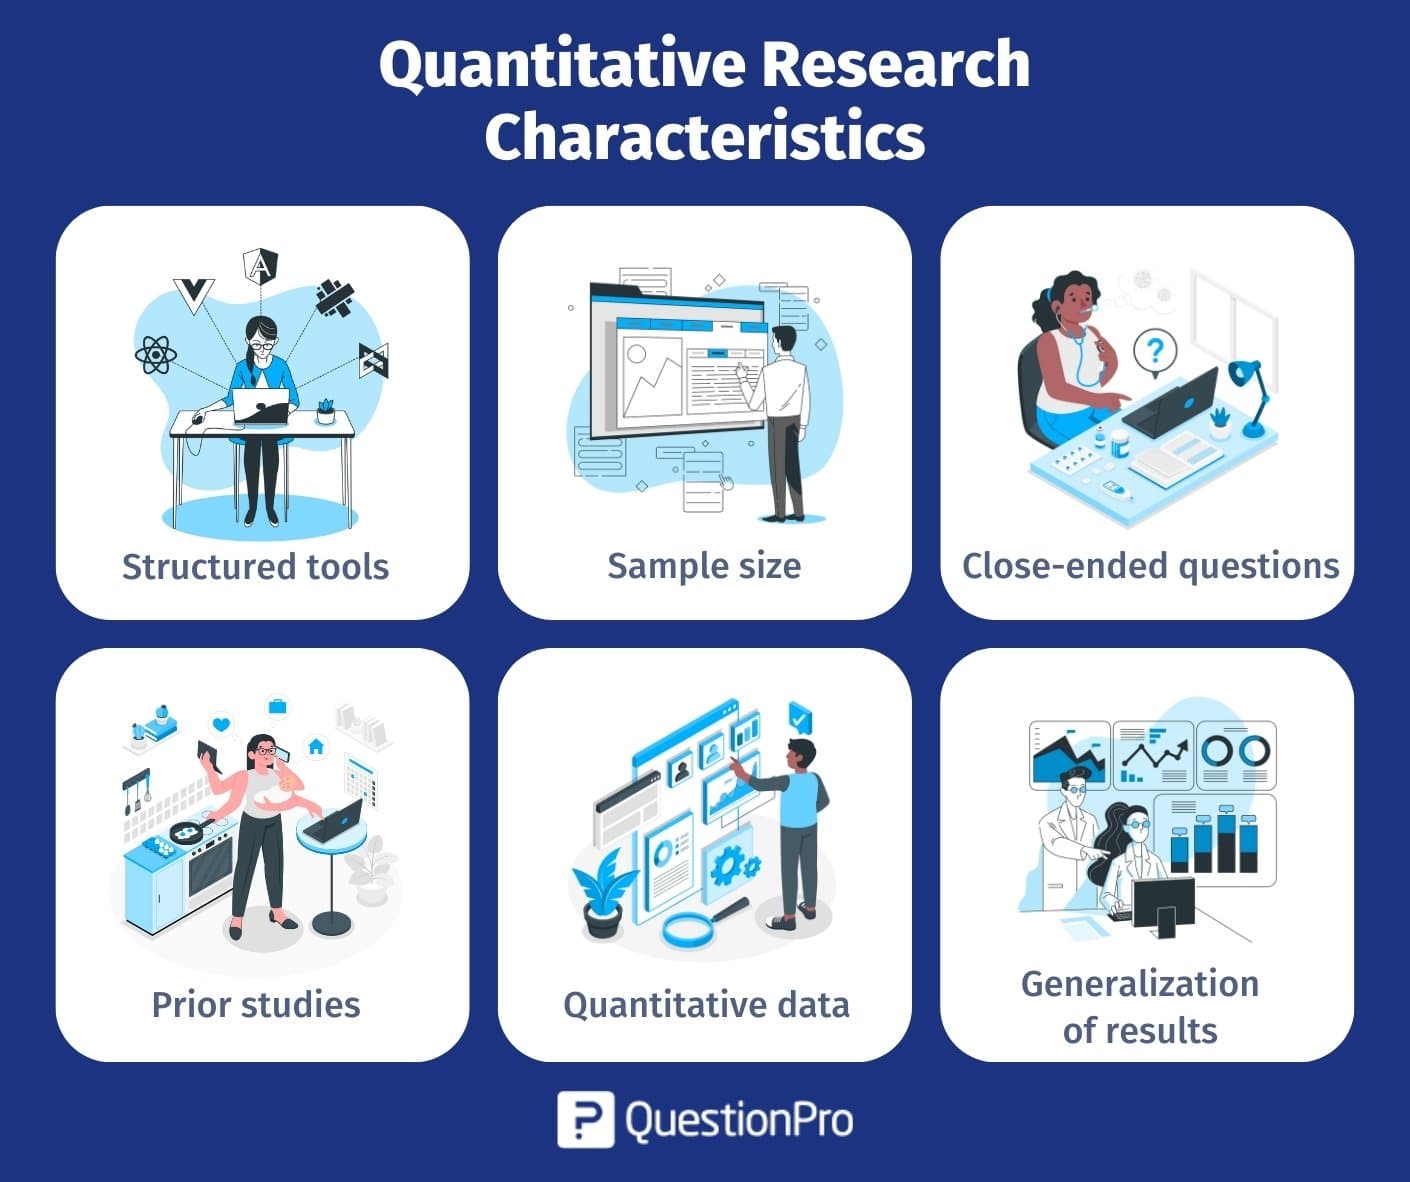 the purpose of a quantitative research plan is to